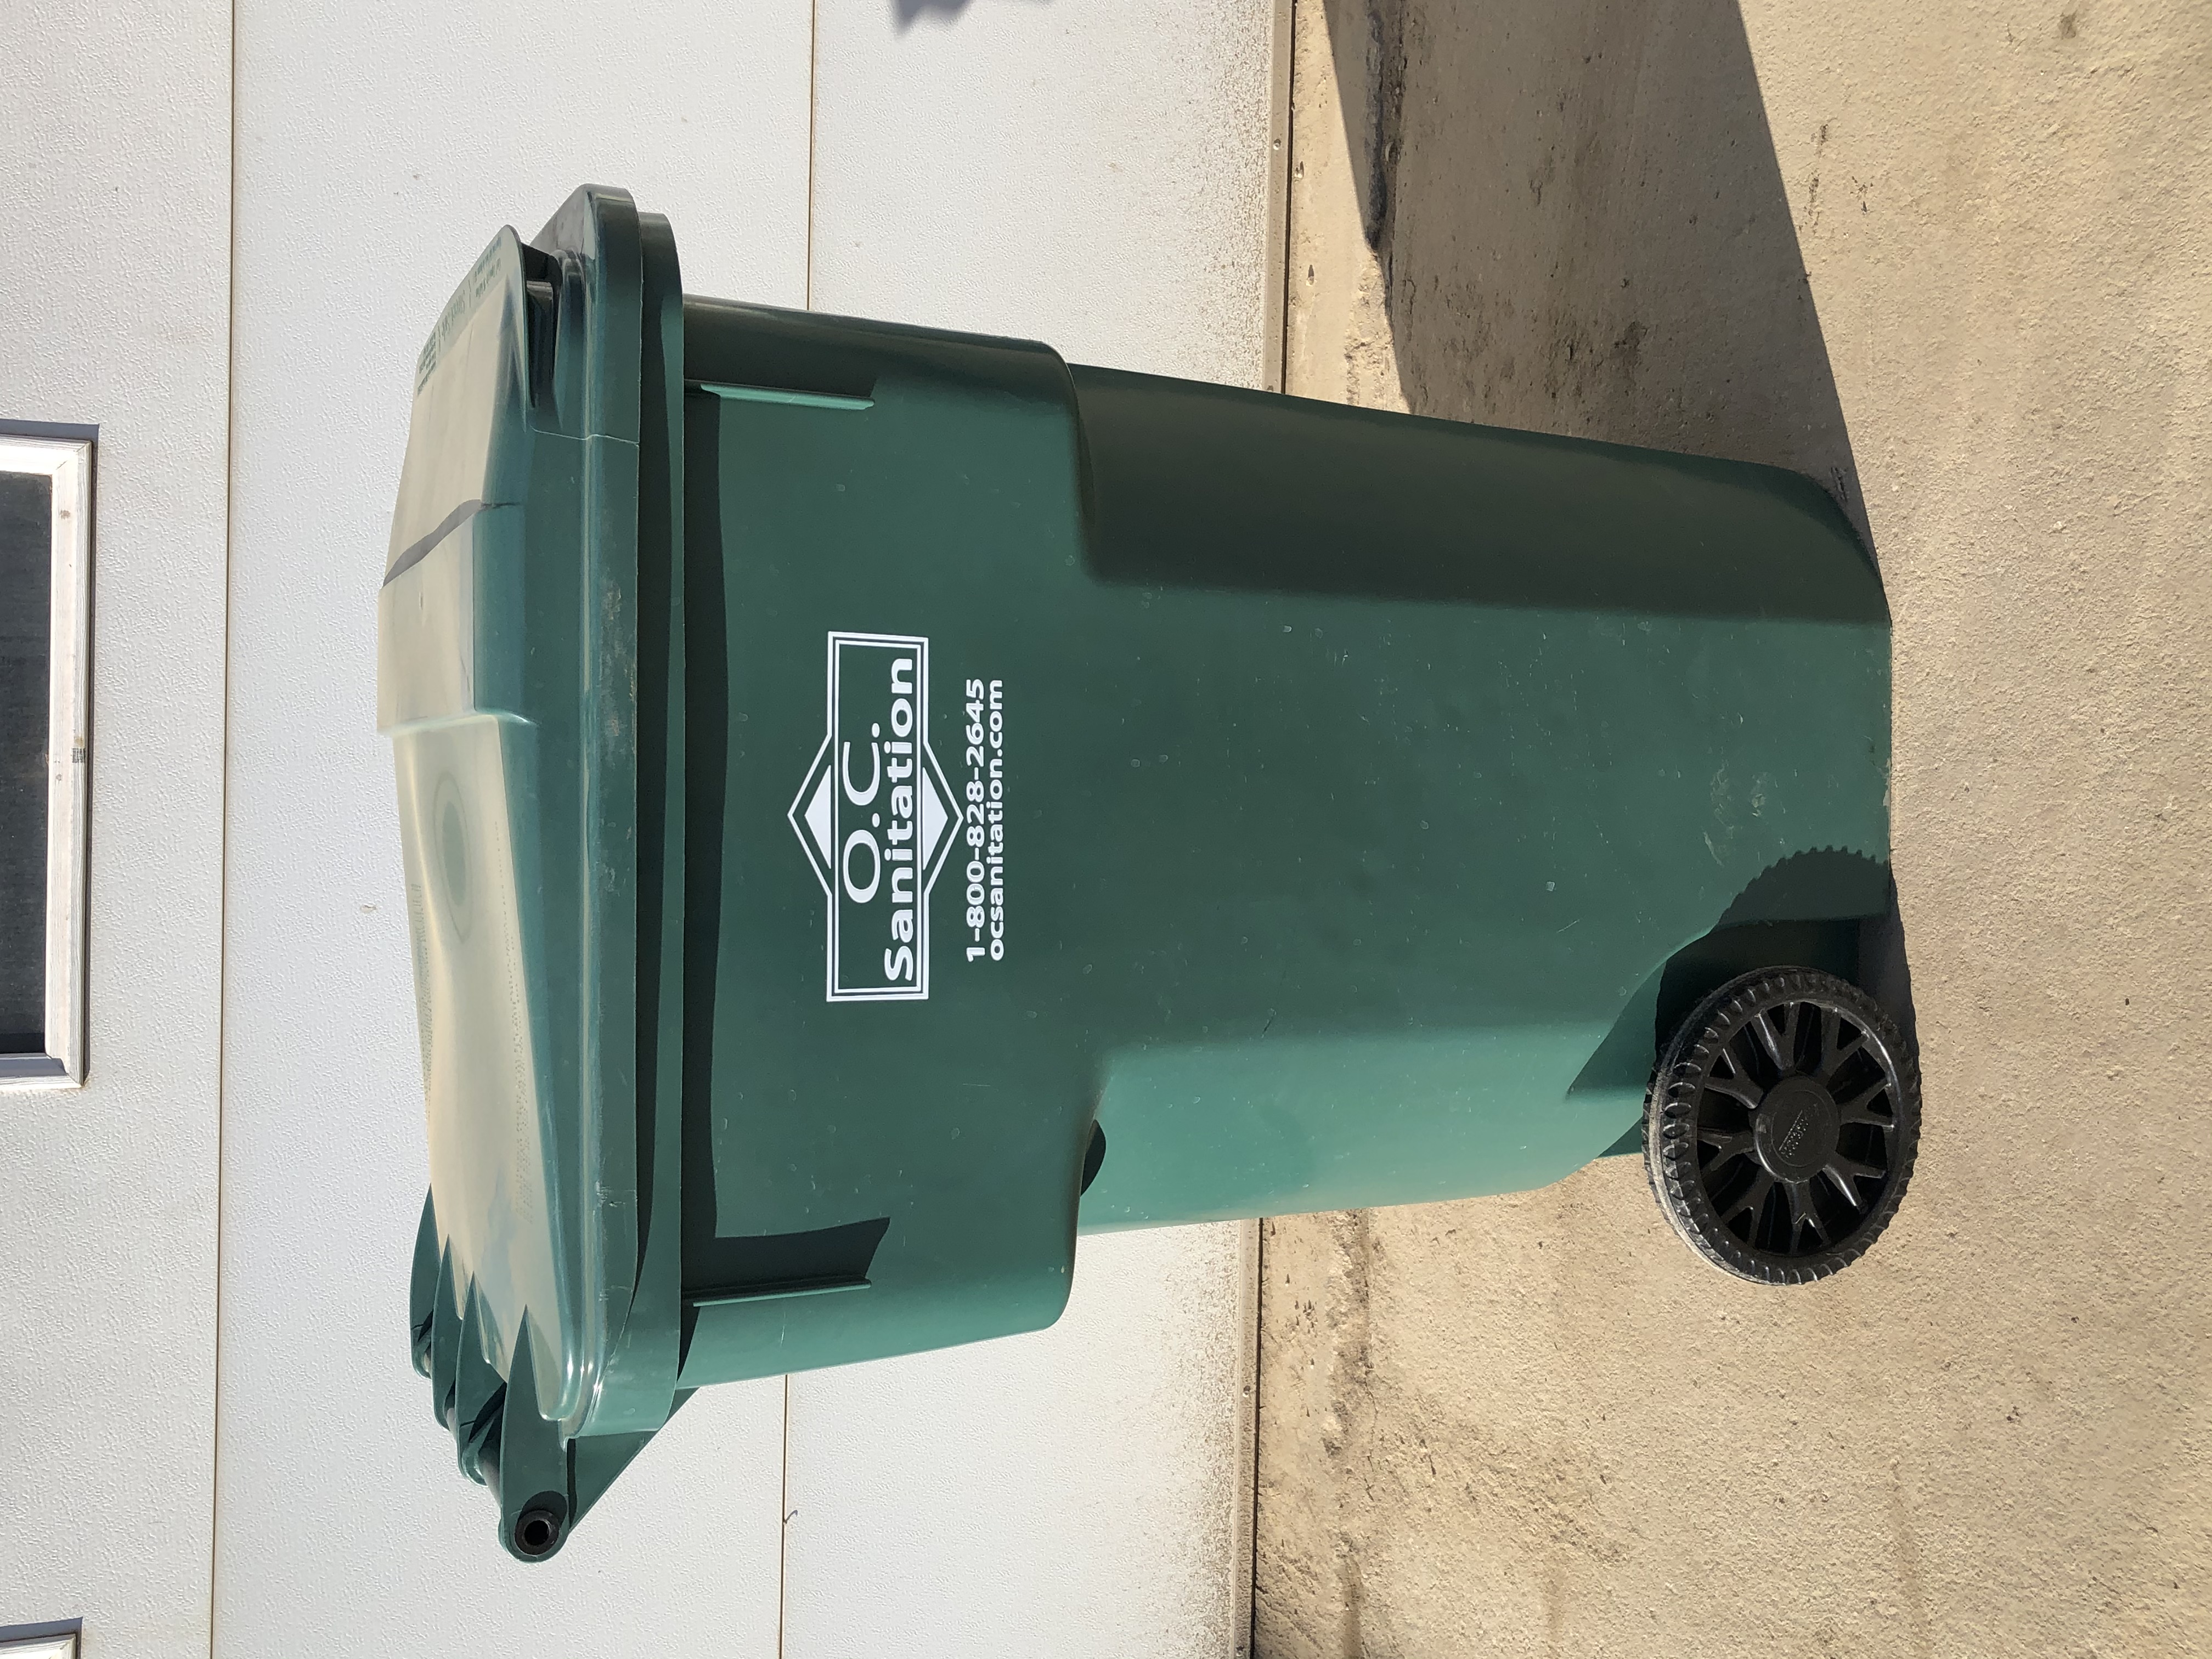 Large refuse containers are available for rent